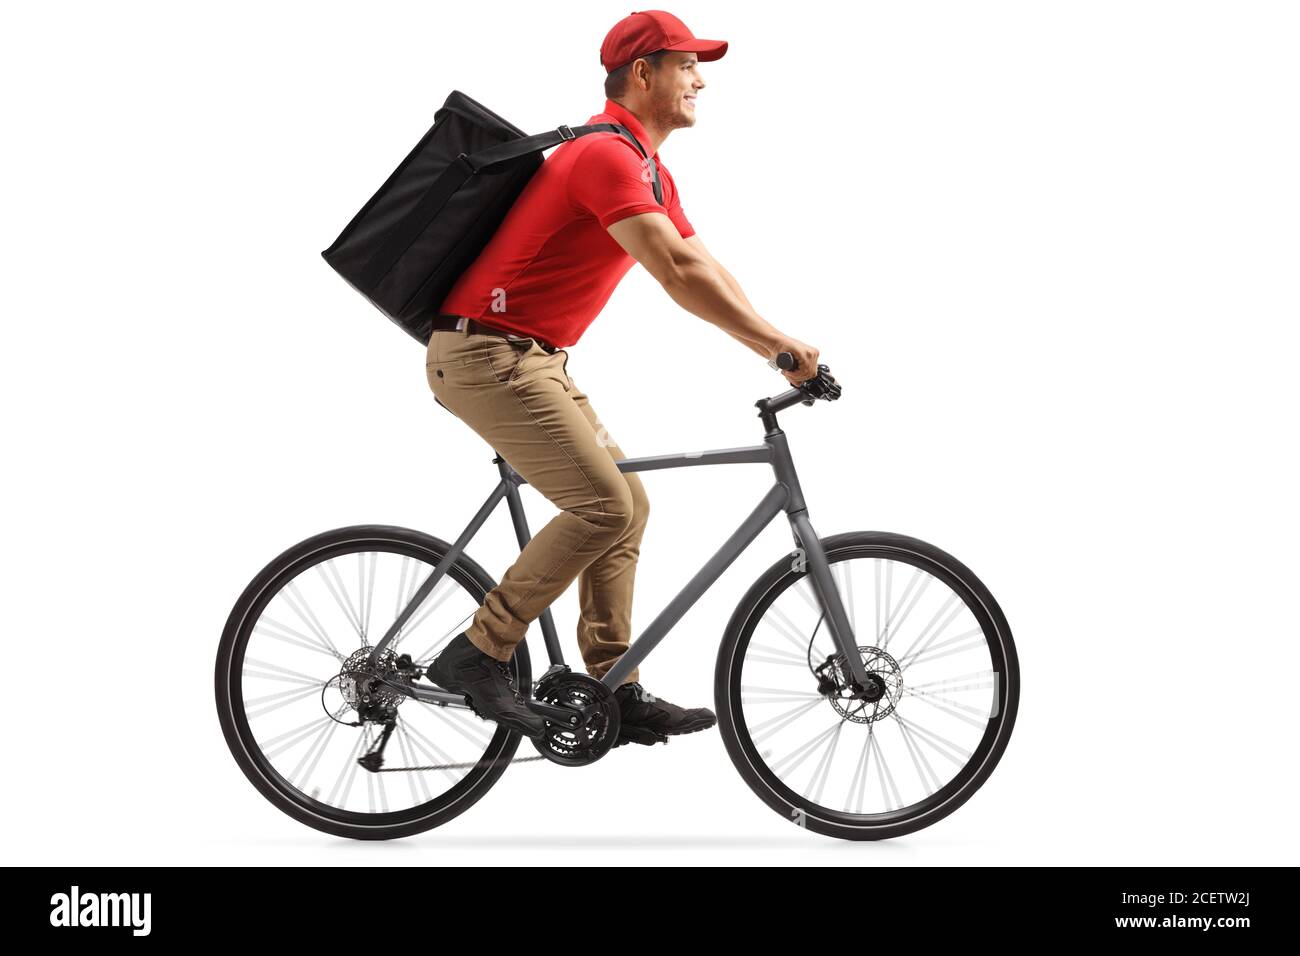 Food delivery guy in a red t-shirt delivering food with a bicycle isolated on white background Stock Photo